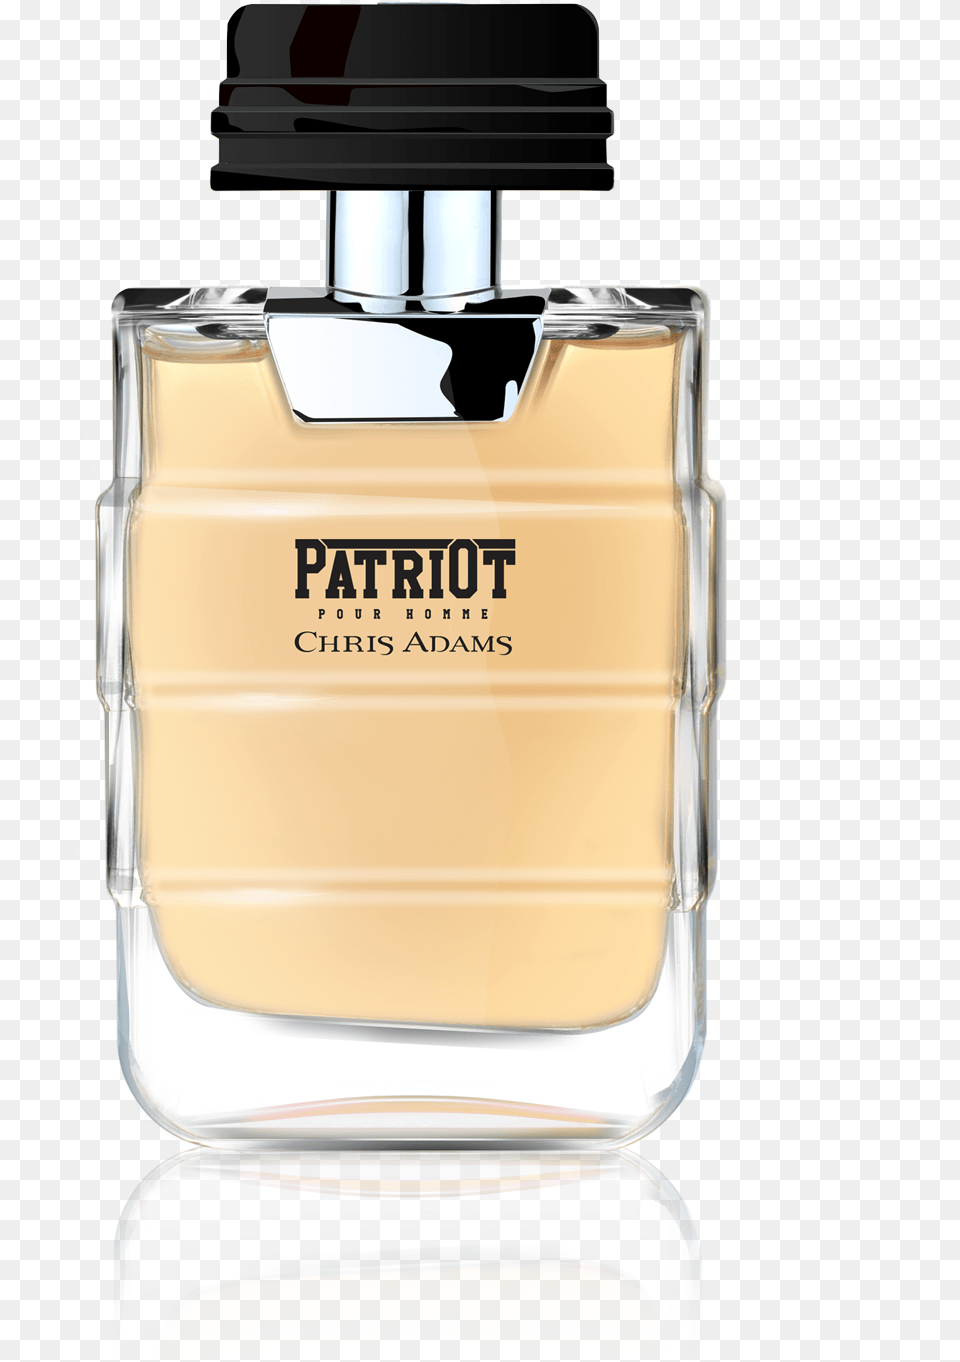 Perfume Images Patriot, Bottle, Cosmetics Free Png